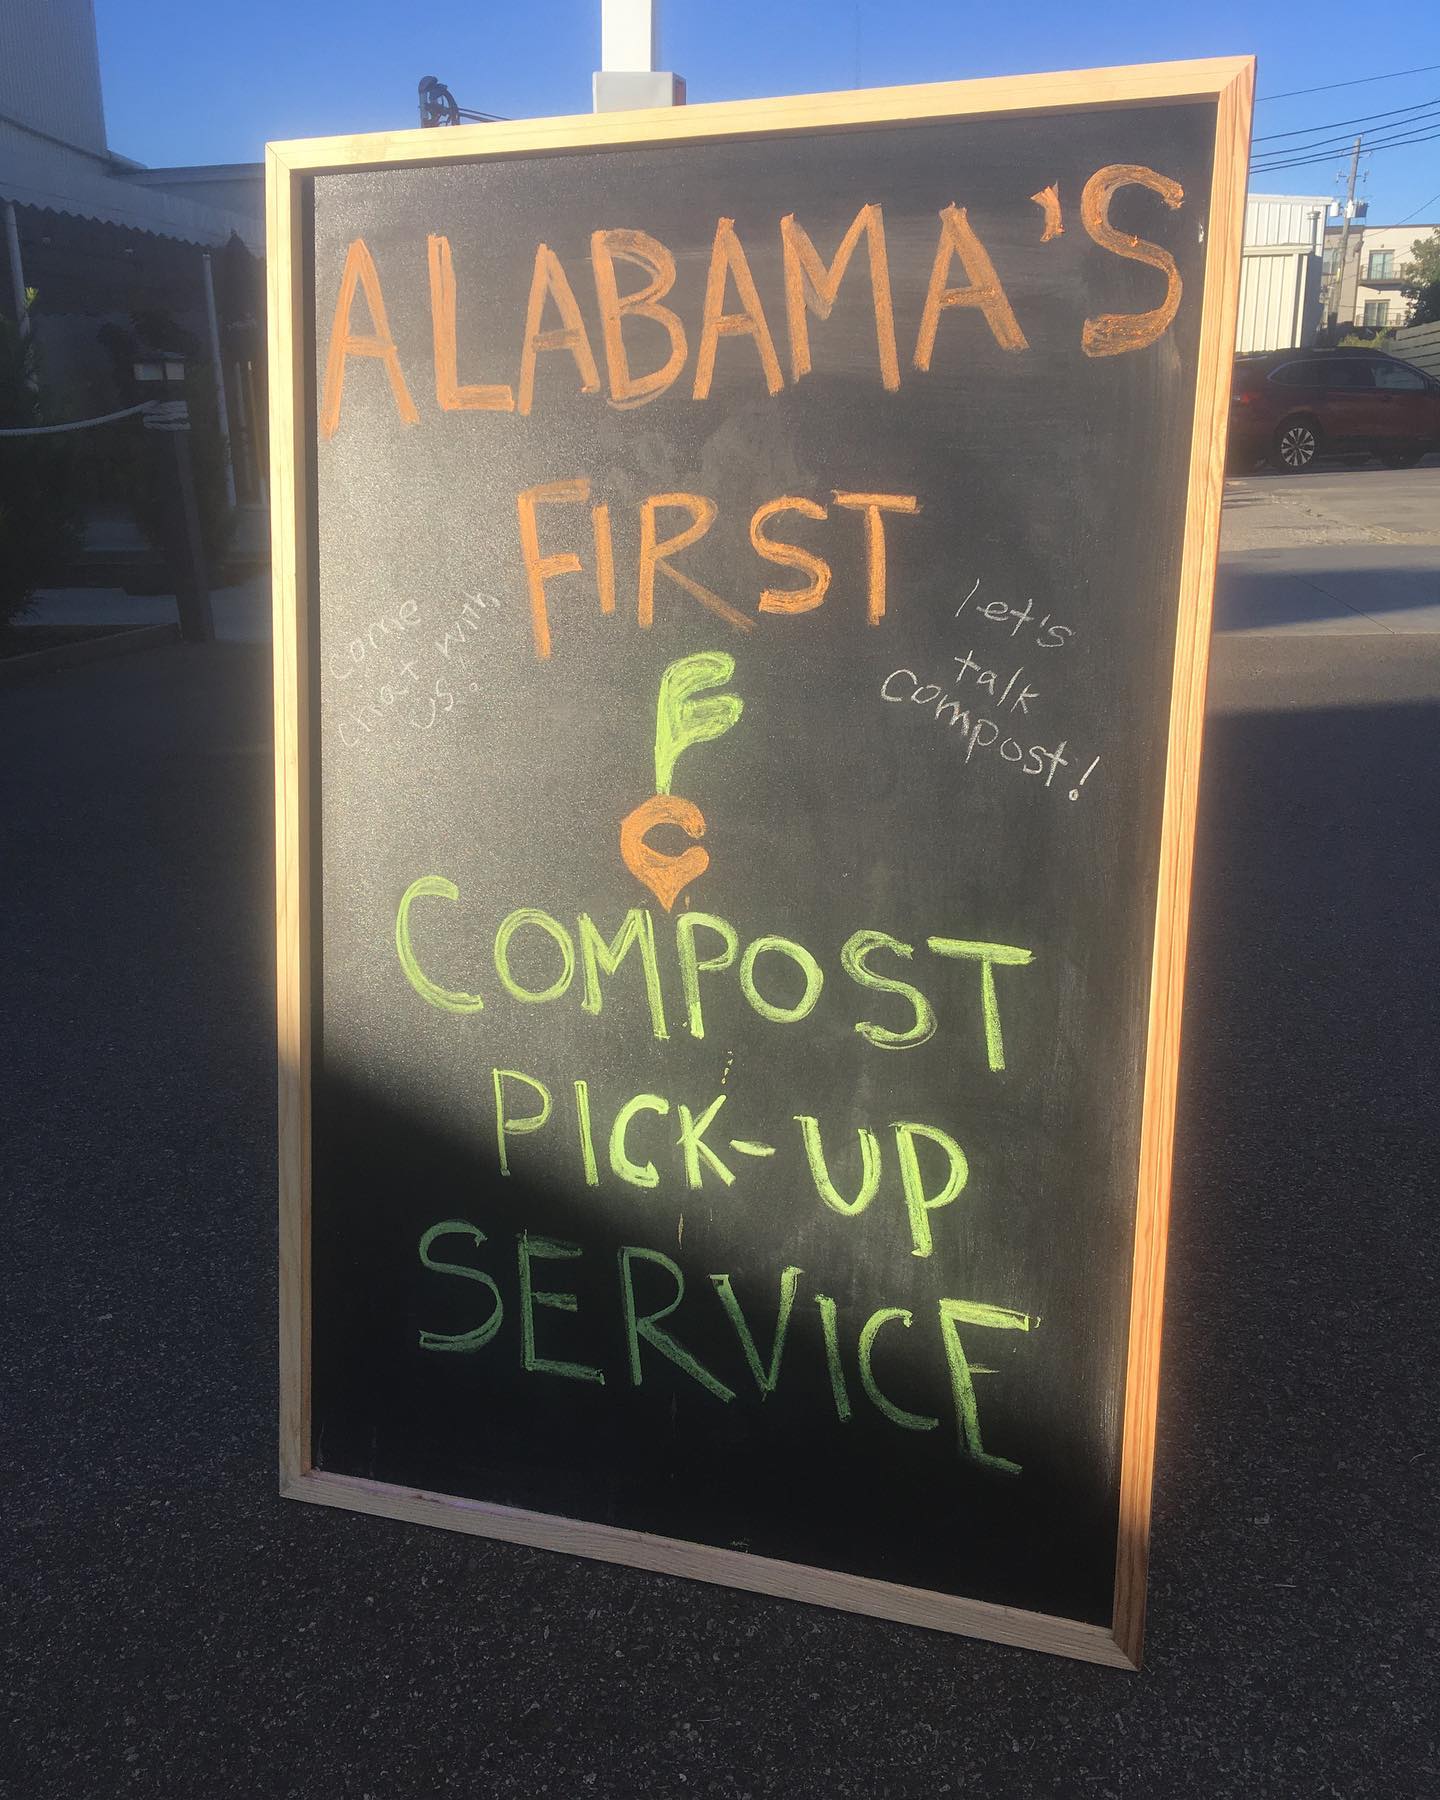 122469488 134660138392268 2438844546856936220 o Pick-up for compost in Birmingham? Yeah—we have that now + it's the first in the state